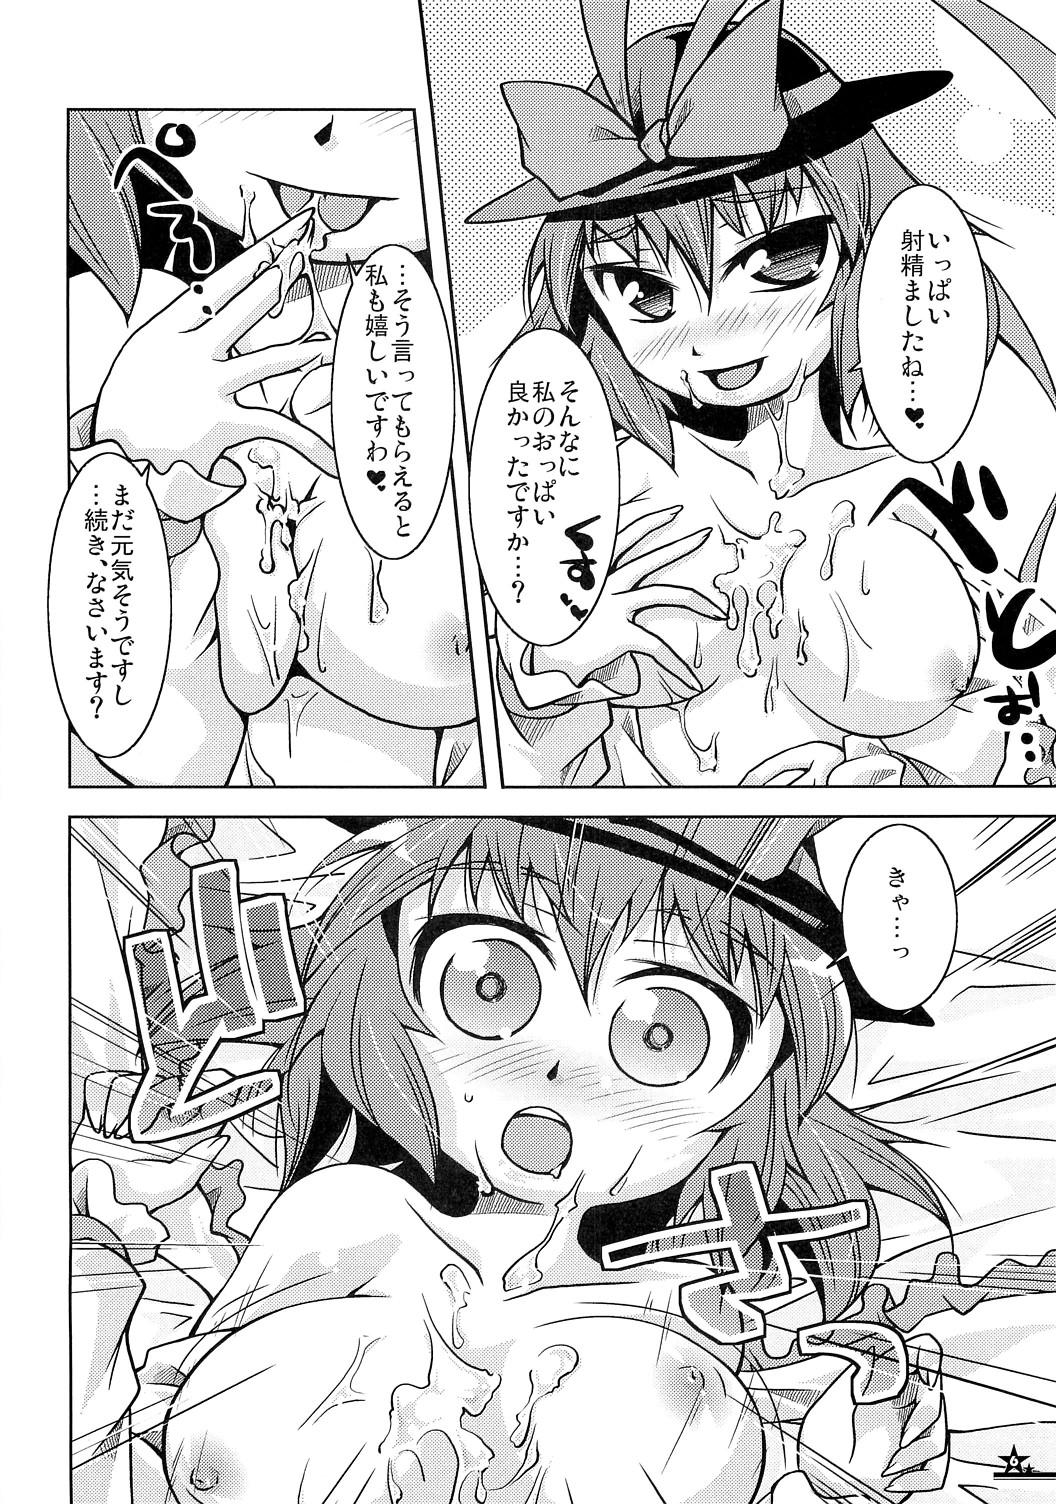 Mexicano Christmas Night Fever - Touhou project Uncensored - Page 5